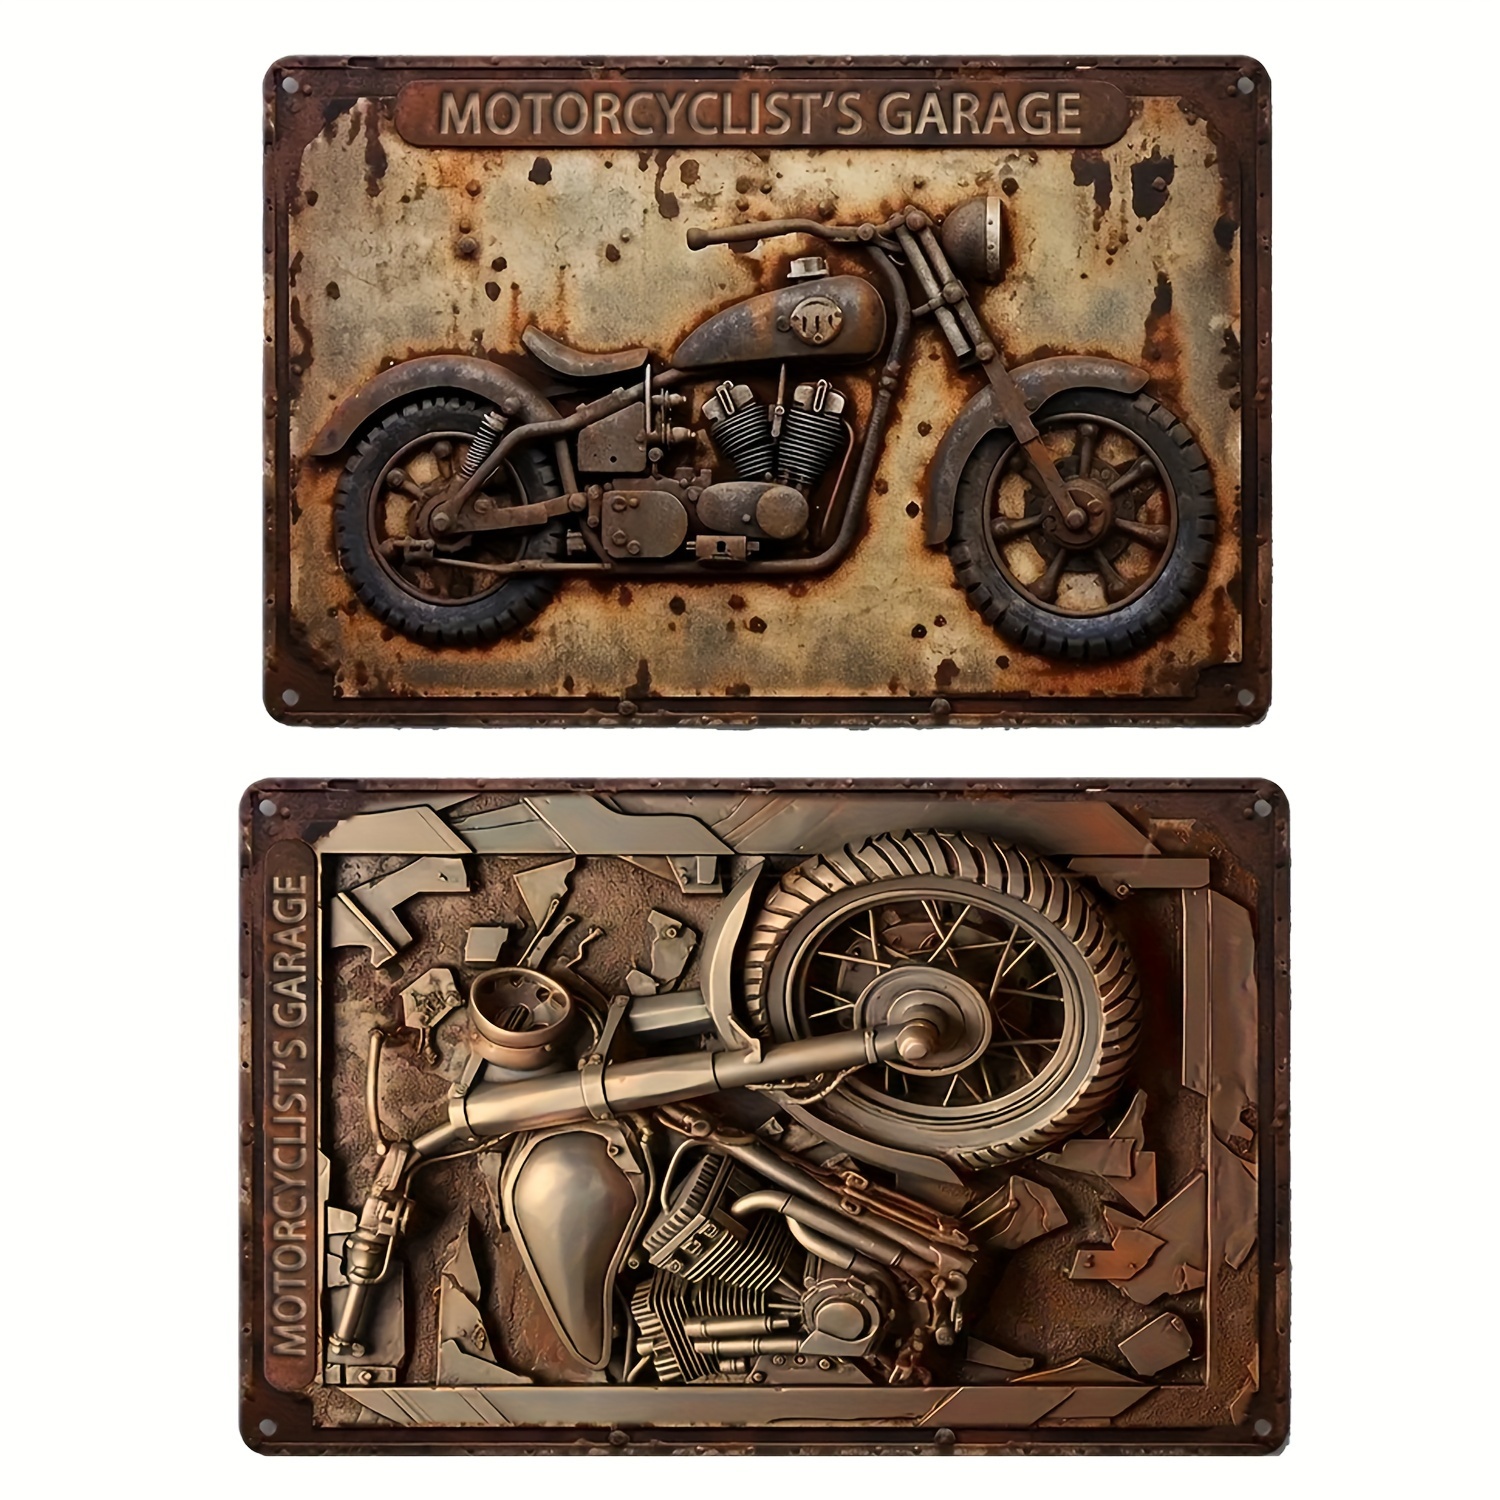 

1pc Vintage Motorcycle Metal Sign (12"x8"), 2d Classic Motorbike Print, Motorcyclist's Garage Wall Art, Rustic Home Decor, Farmhouse Porch Decoration, Garage And Outdoor Display